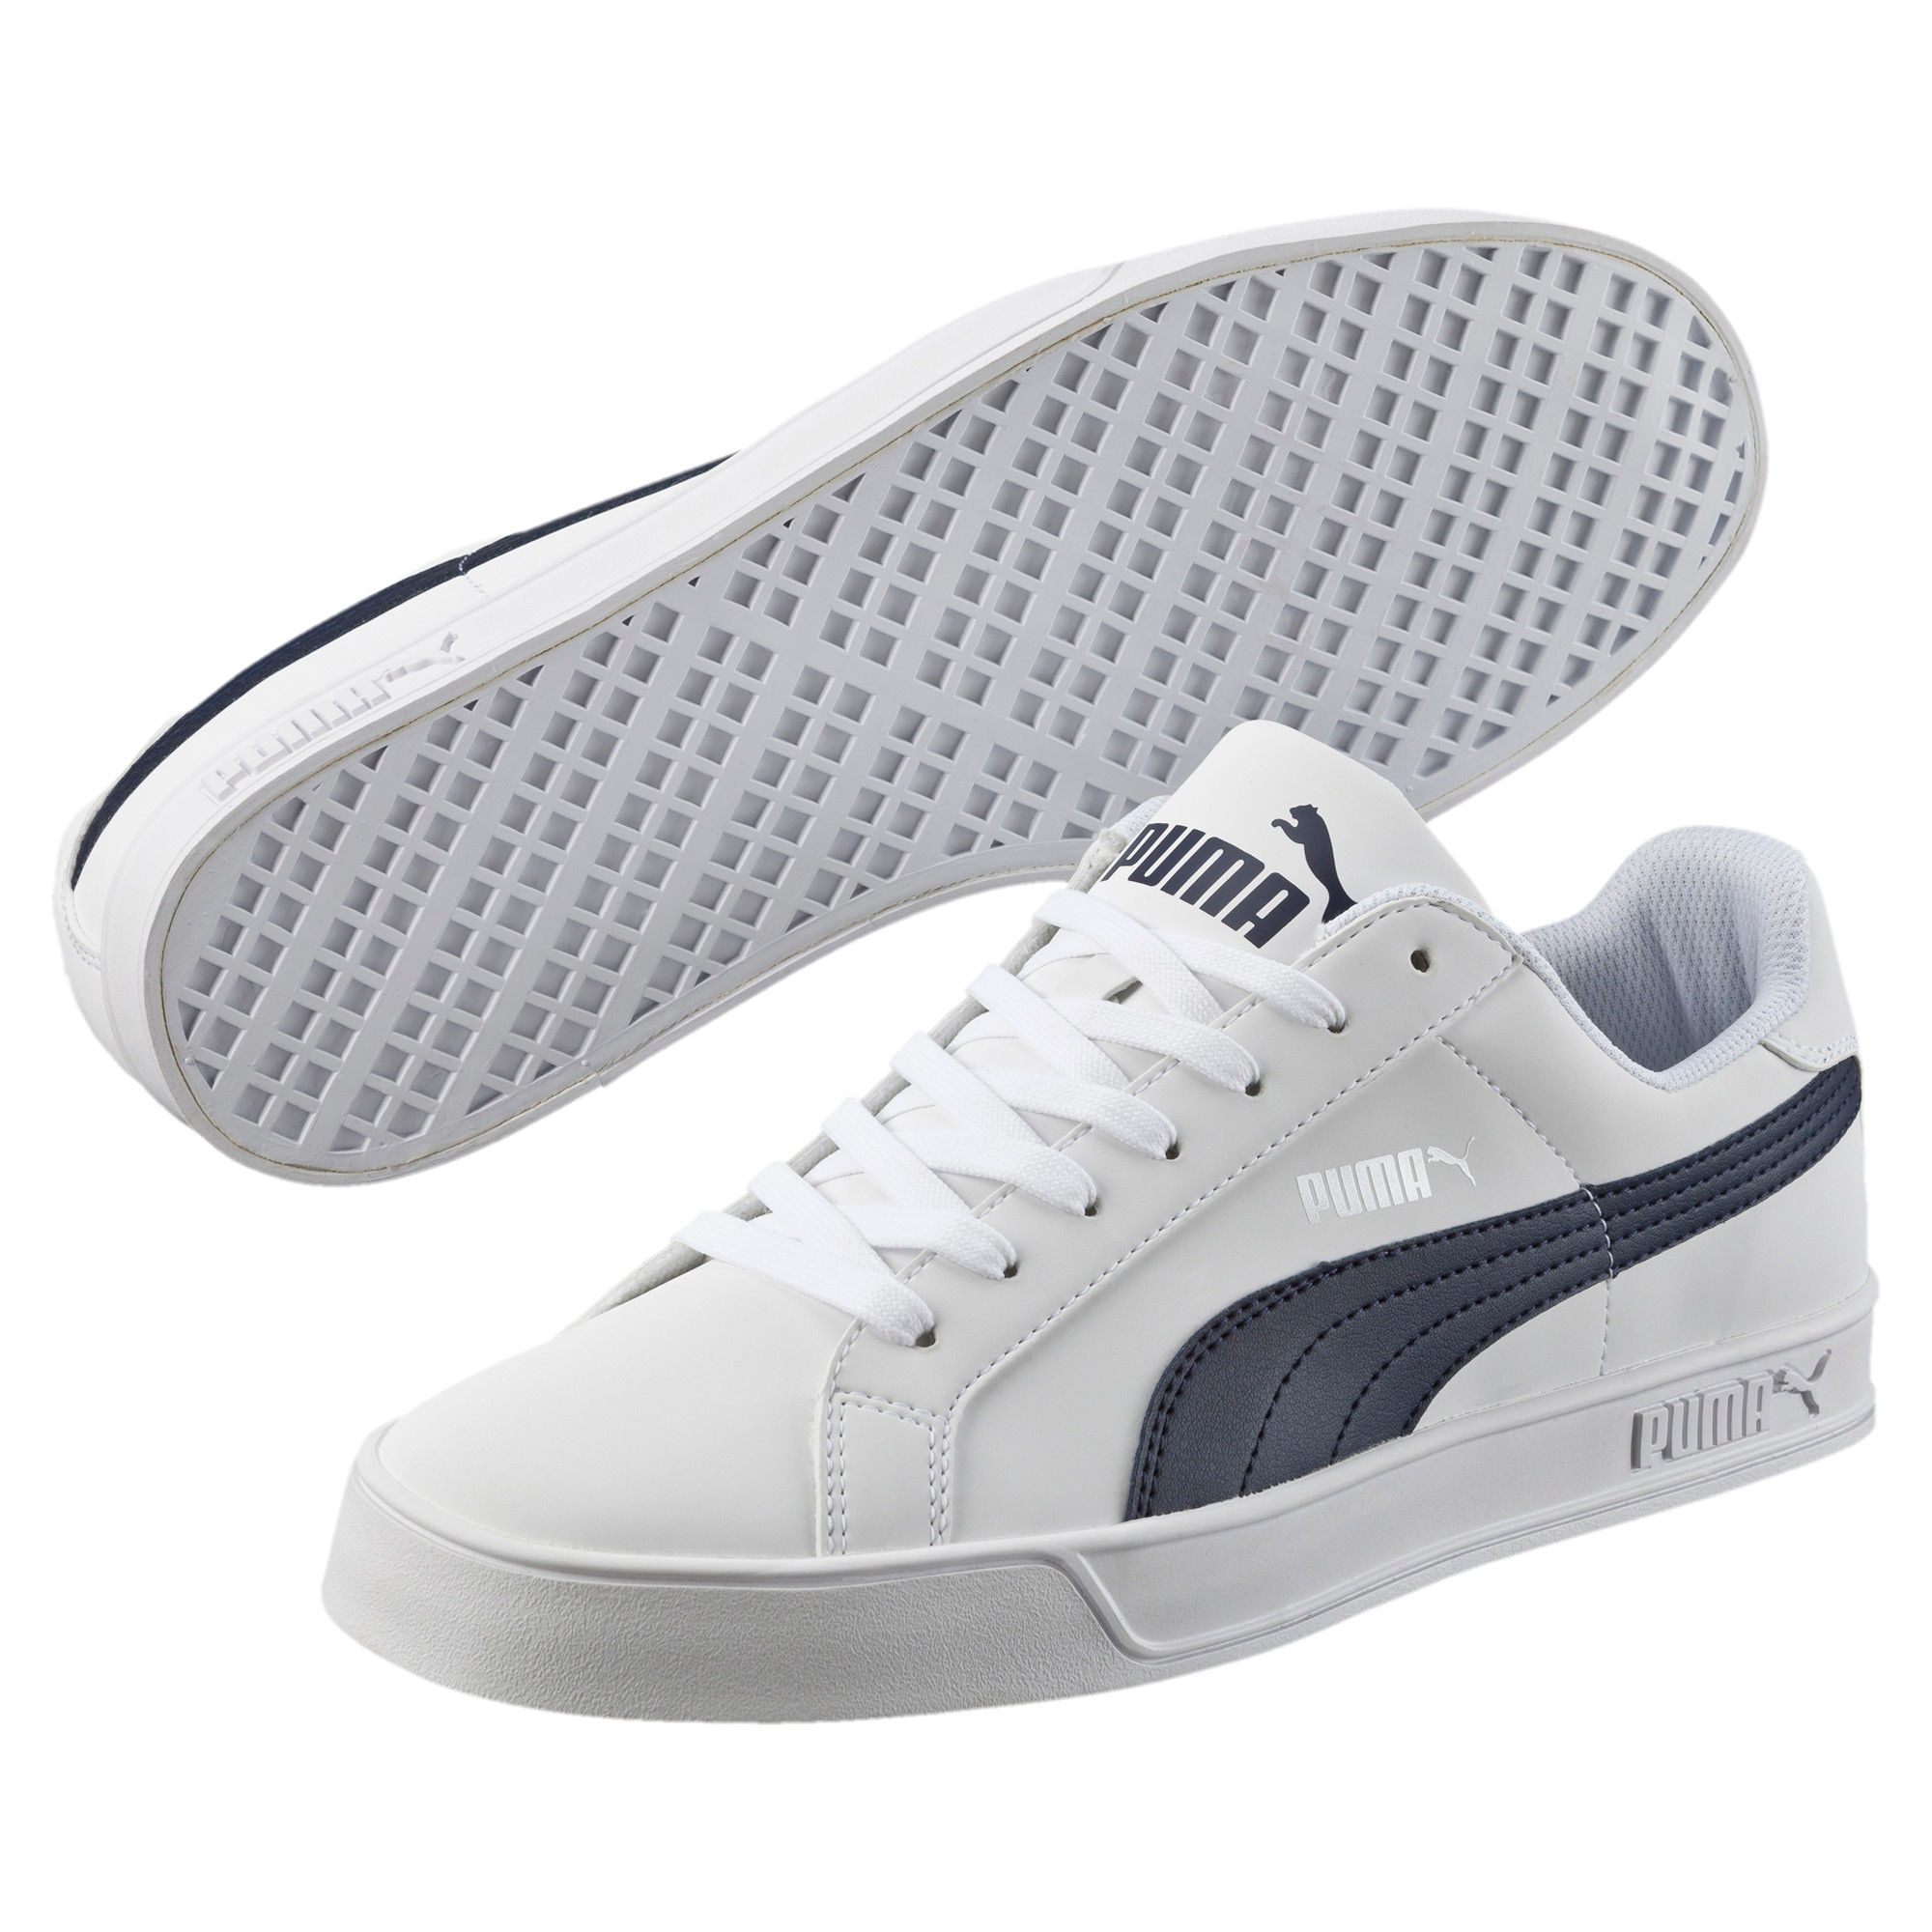 PUMA Smash v2 L Sneakers Review | White Sneakers under 2000| Budget Sneakers  - YouTube